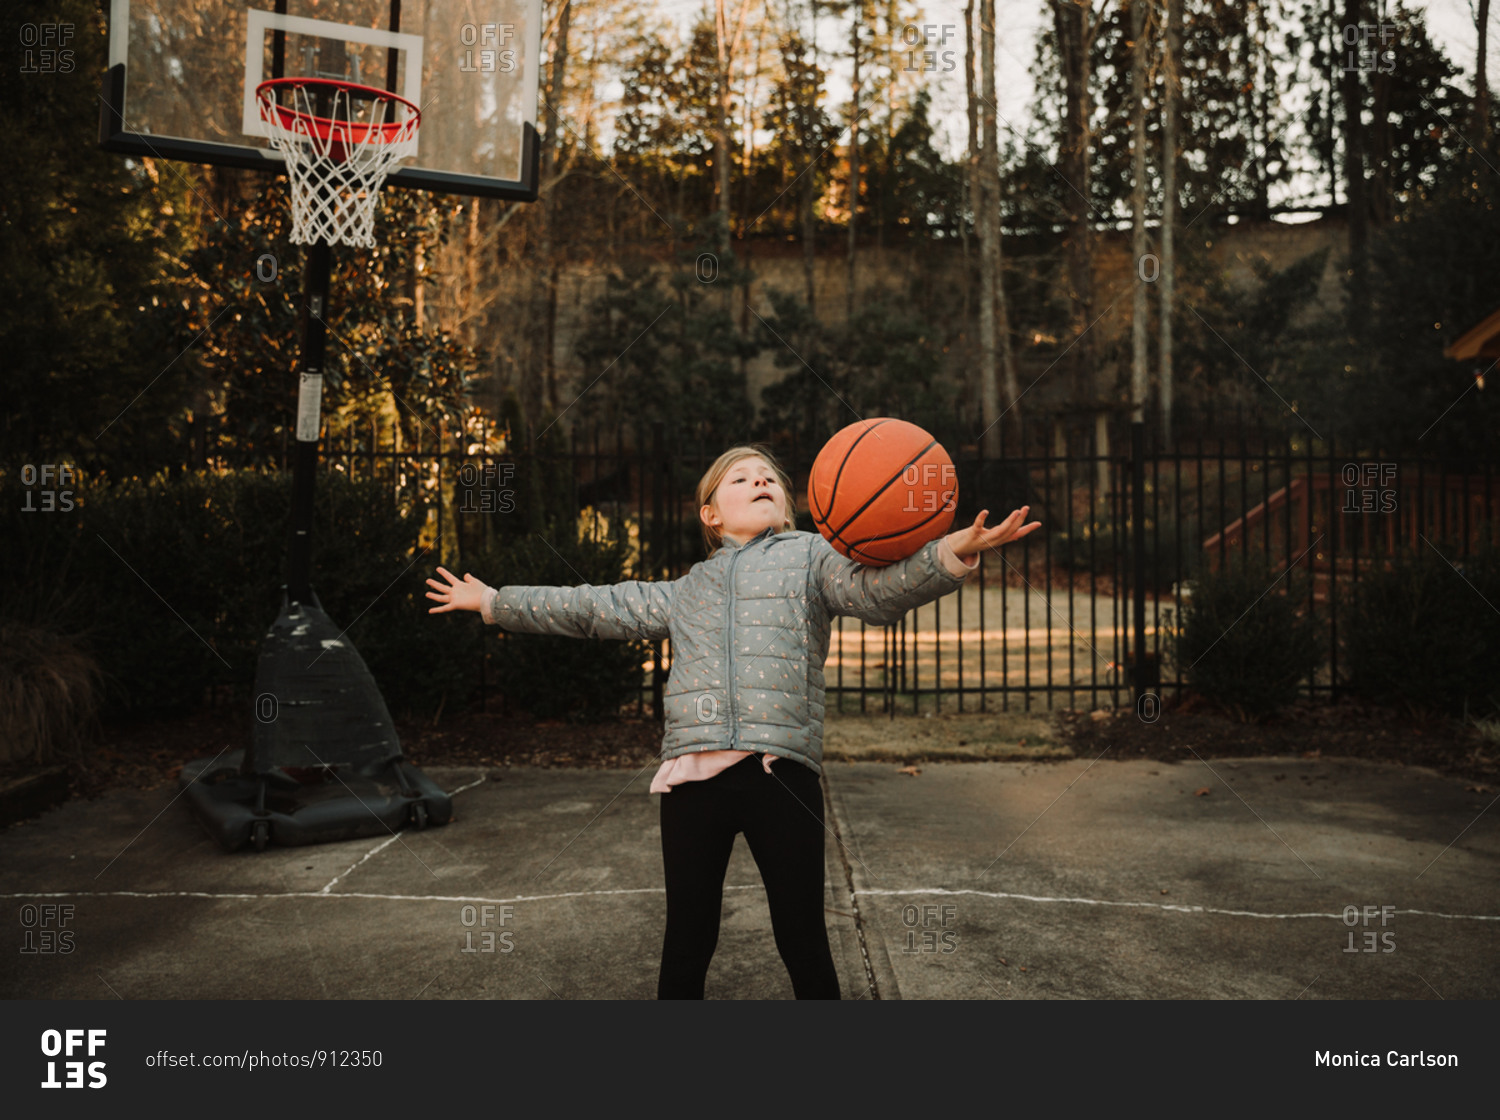 Girl playing basketball in her driveway stock photo -
OFFSET